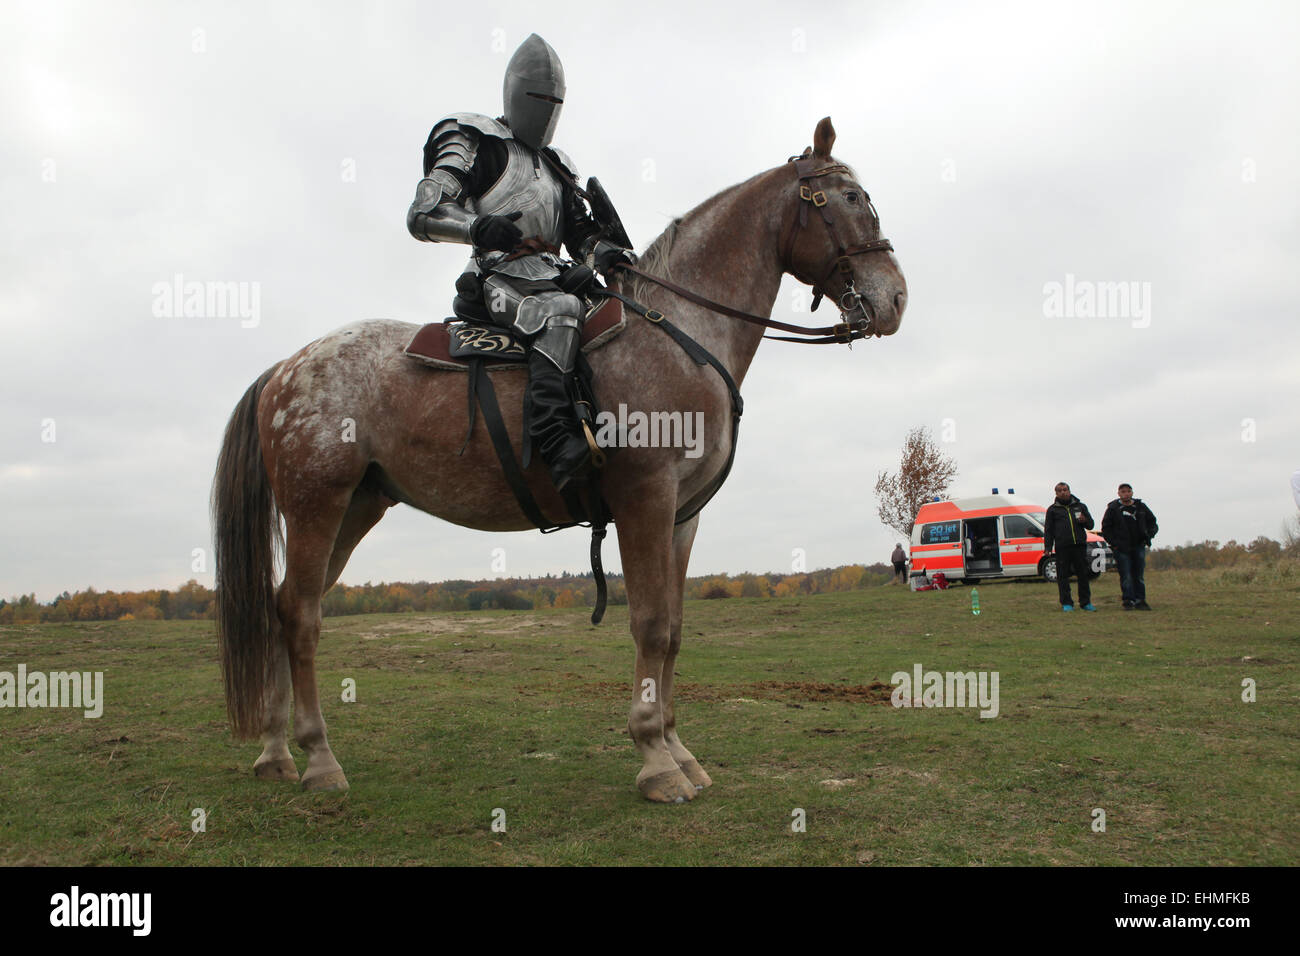 Actor dressed as a medieval knight rides a horse during the filming of the new German film 'Die Ritter' ('The Knights') directed by Carsten Gutschmidt by order of ZDF in Milovice in Central Bohemia, Czech Republic in 23 October 2013. Stock Photo